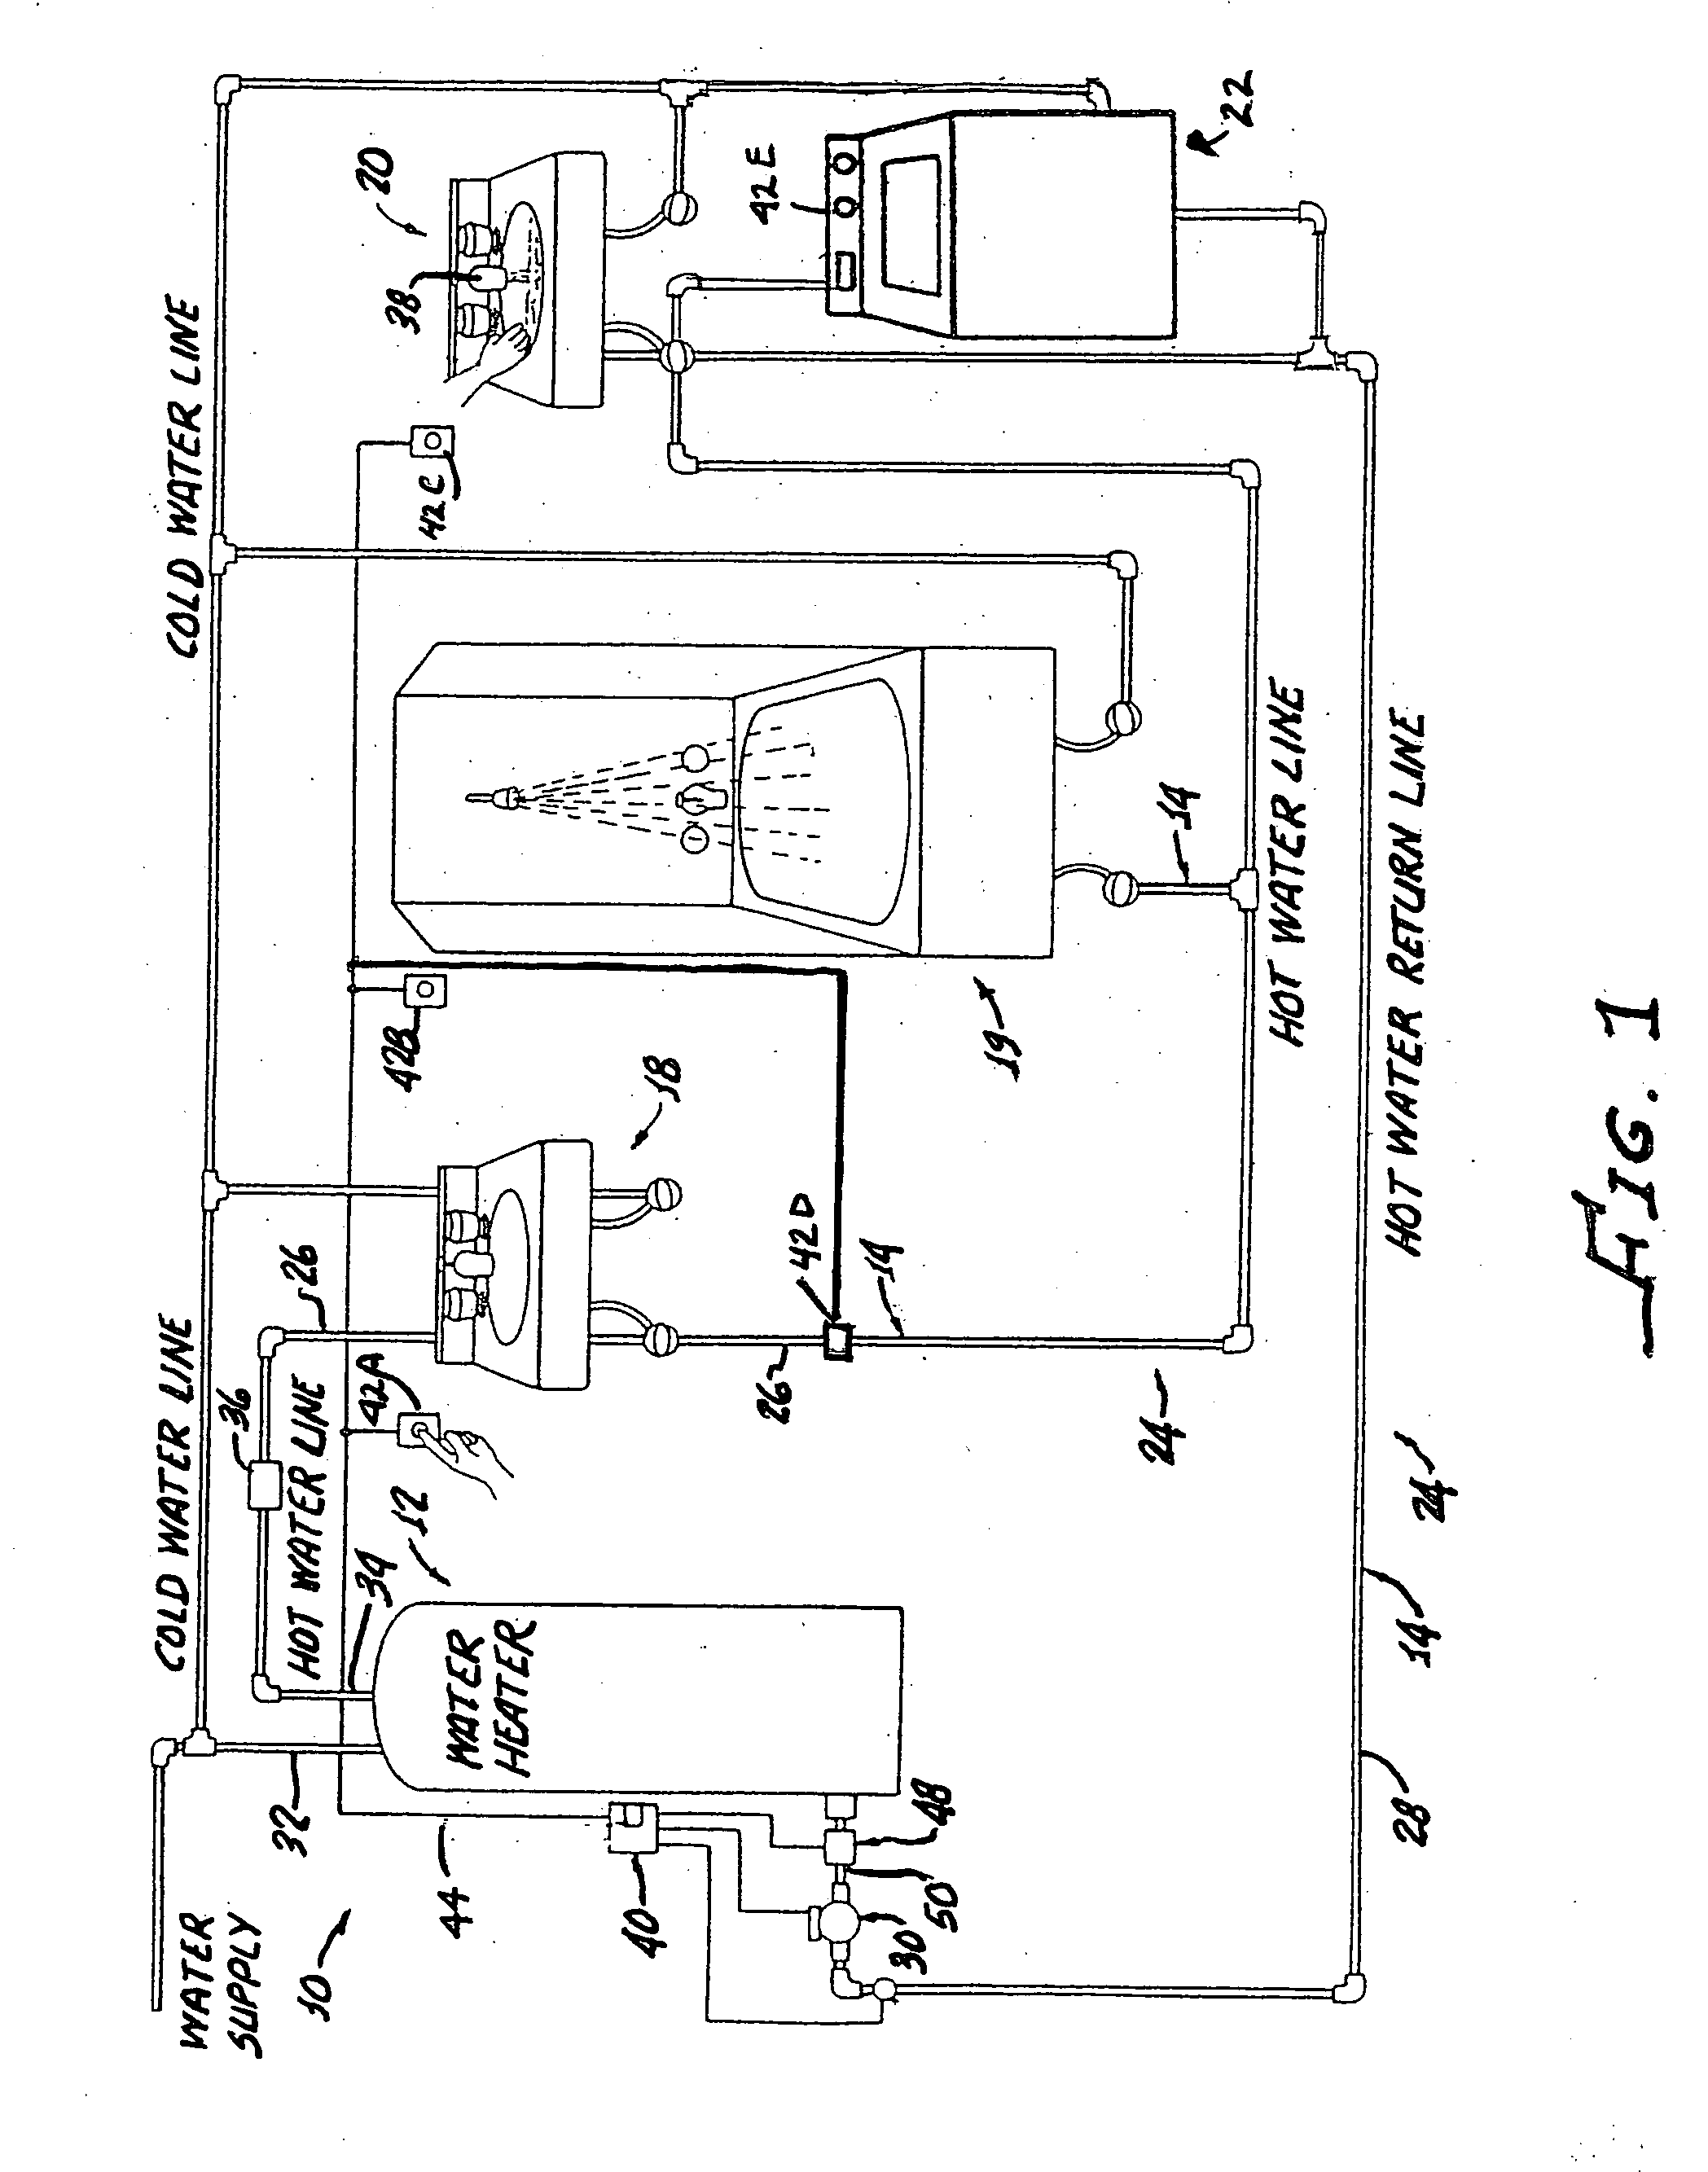 Method of operating a plumbing system